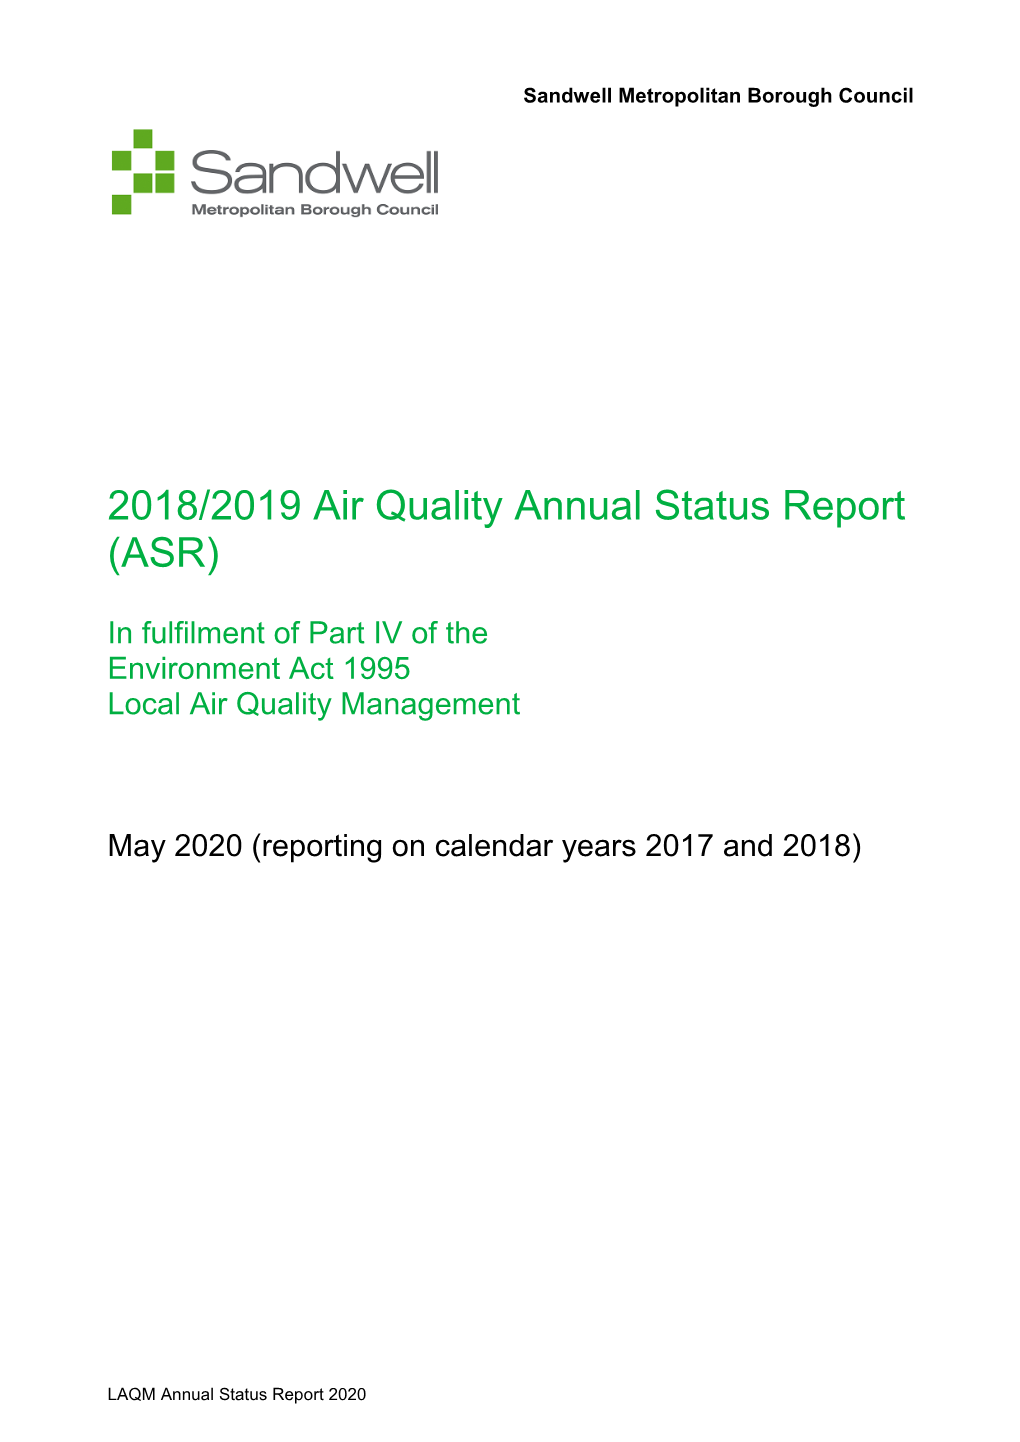 Executive Summary: Air Quality in Our Area